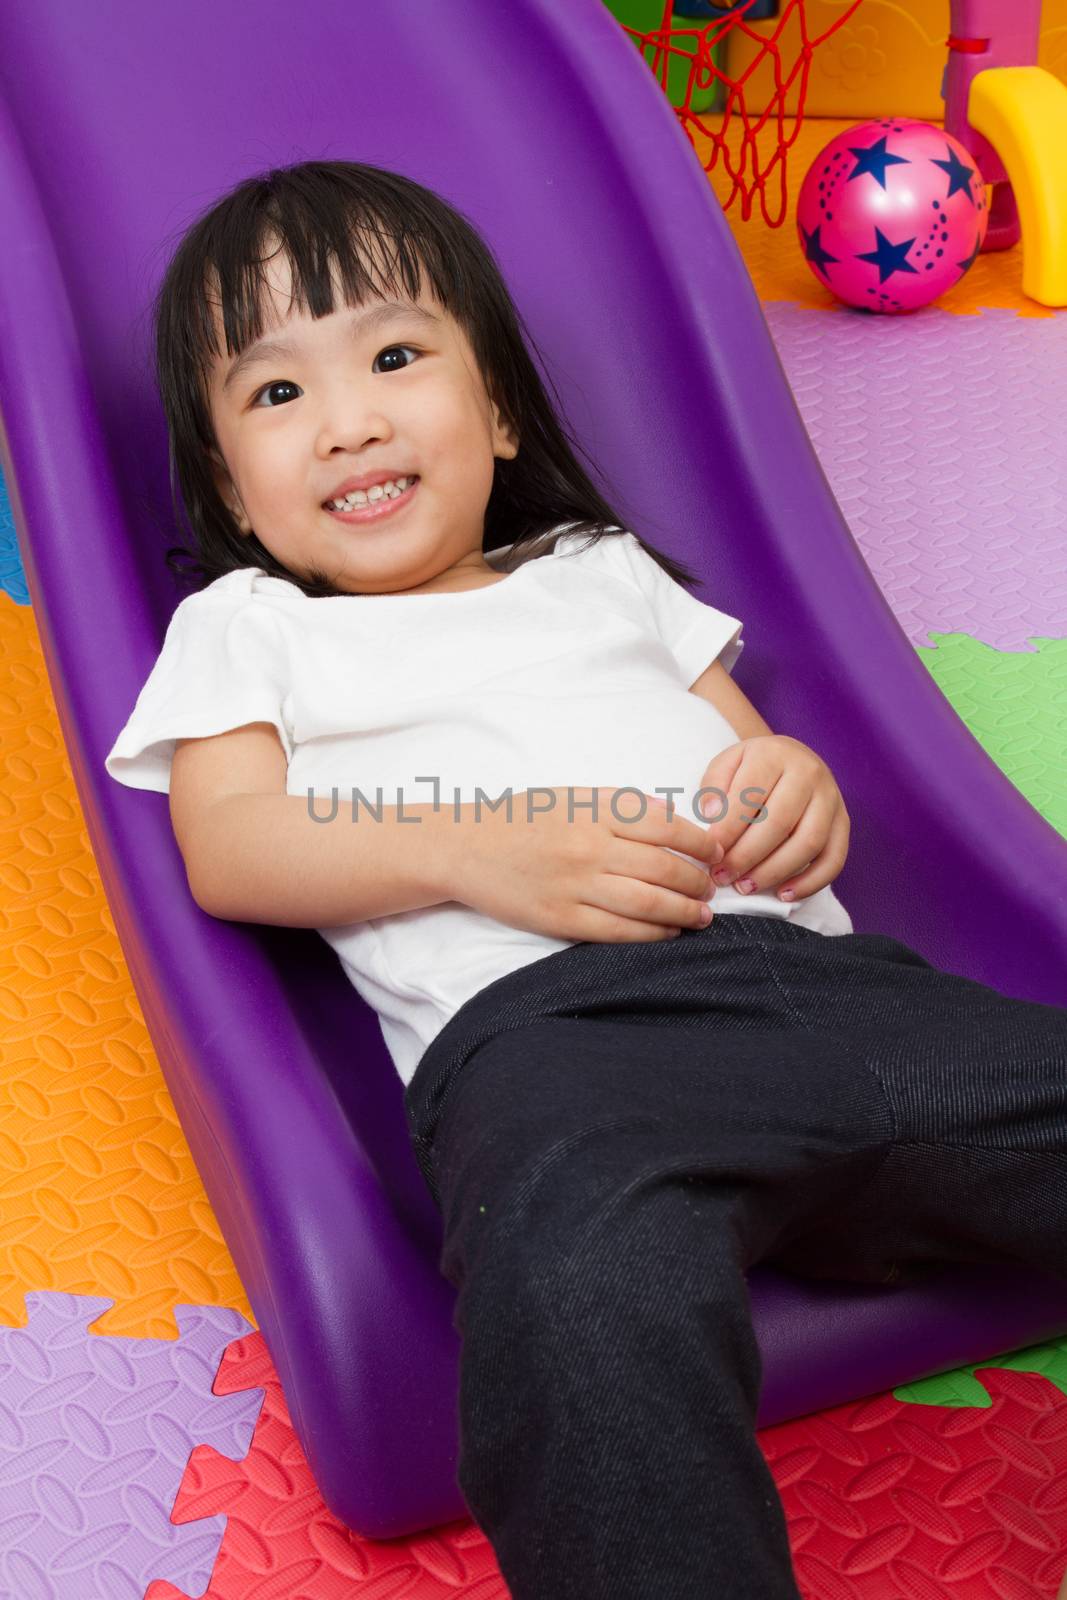 Asian Chinese little girl playing on the slide at indoor colourful playground.